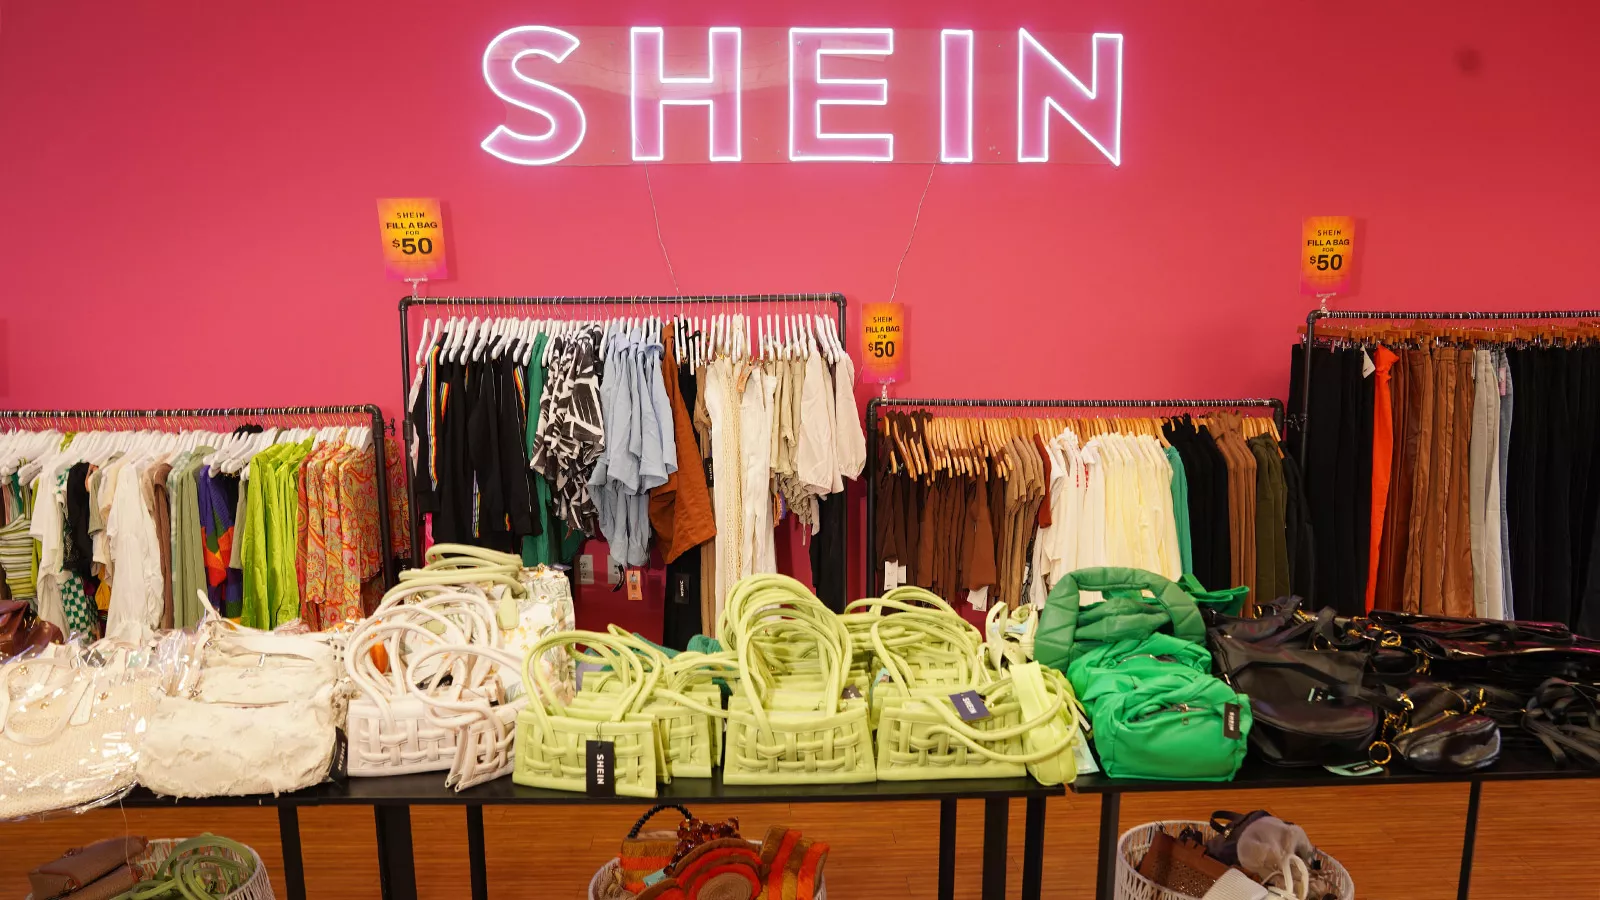 Presley Ann / Getty Images for SHEIN